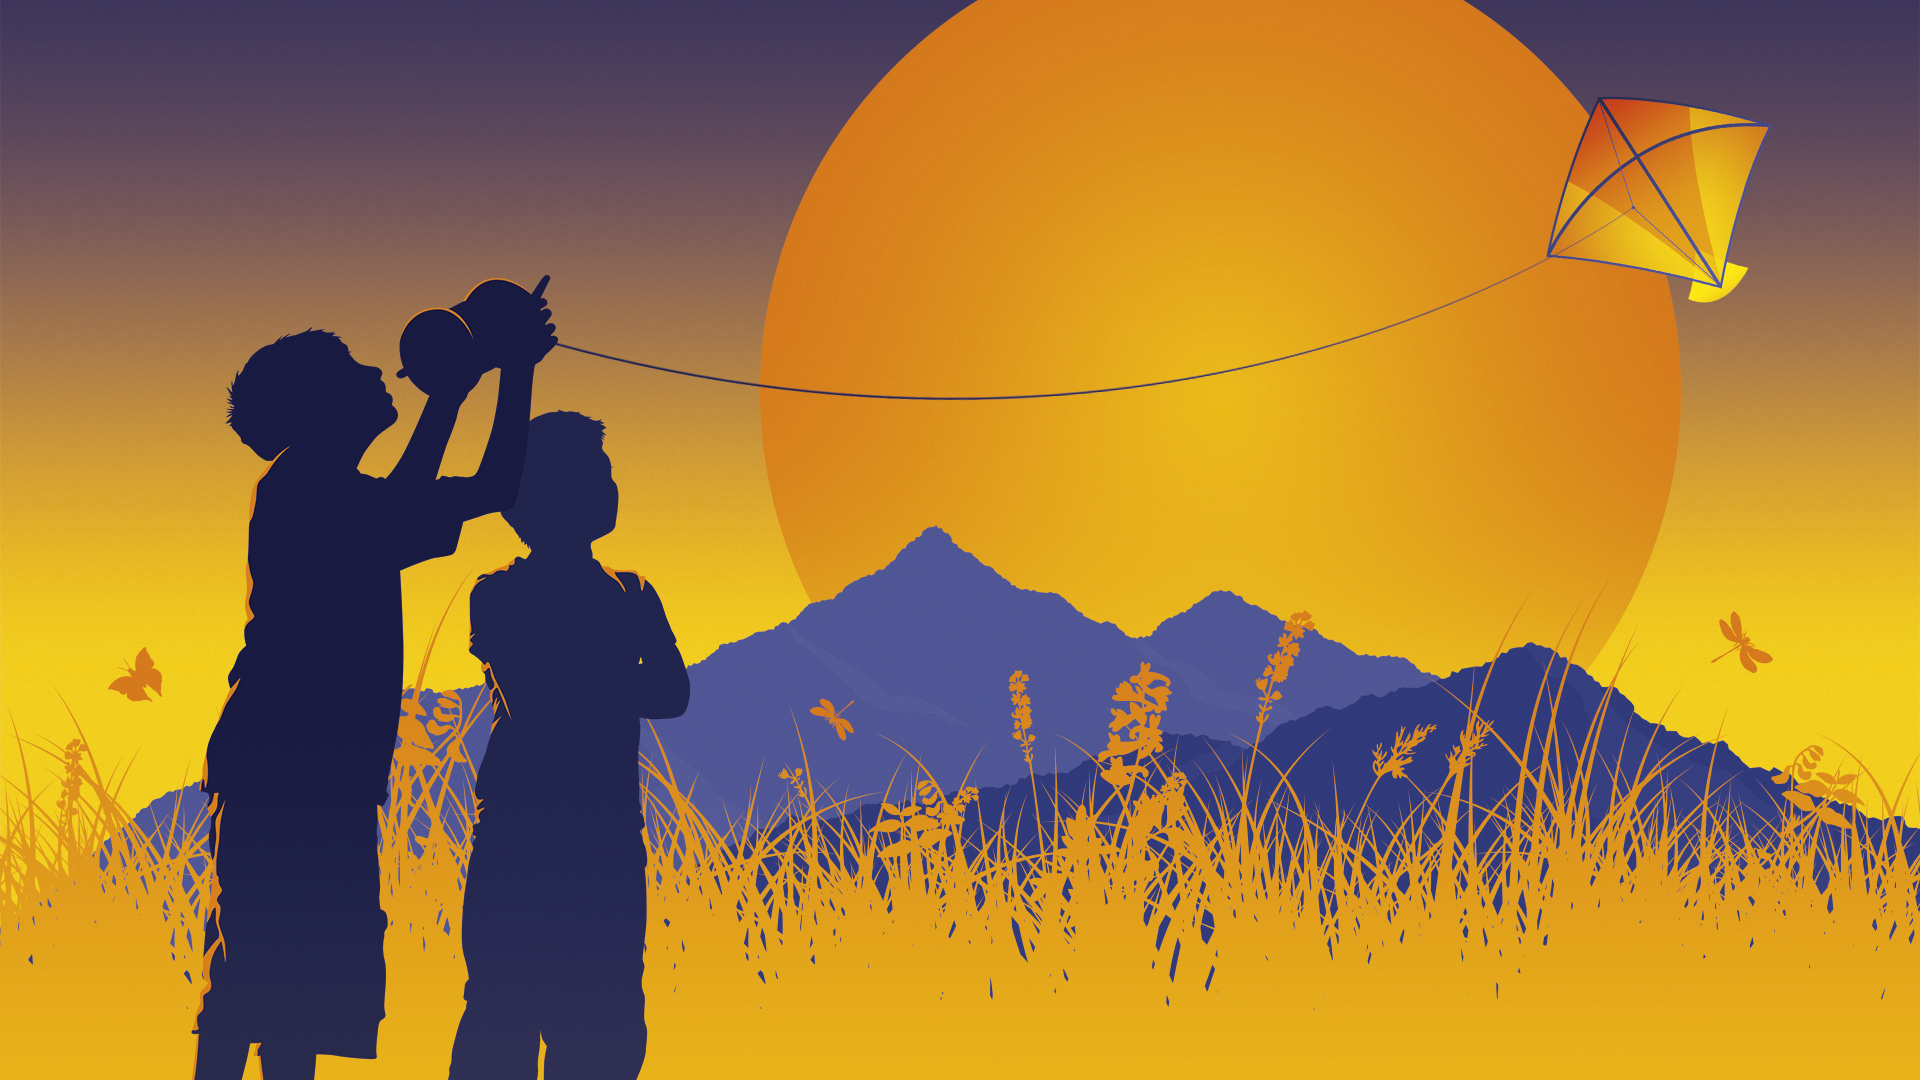 A cartoon of two blue silhouettes stood in a field in front of a mountain range. The two people fly a kite in front of a large orange sun.